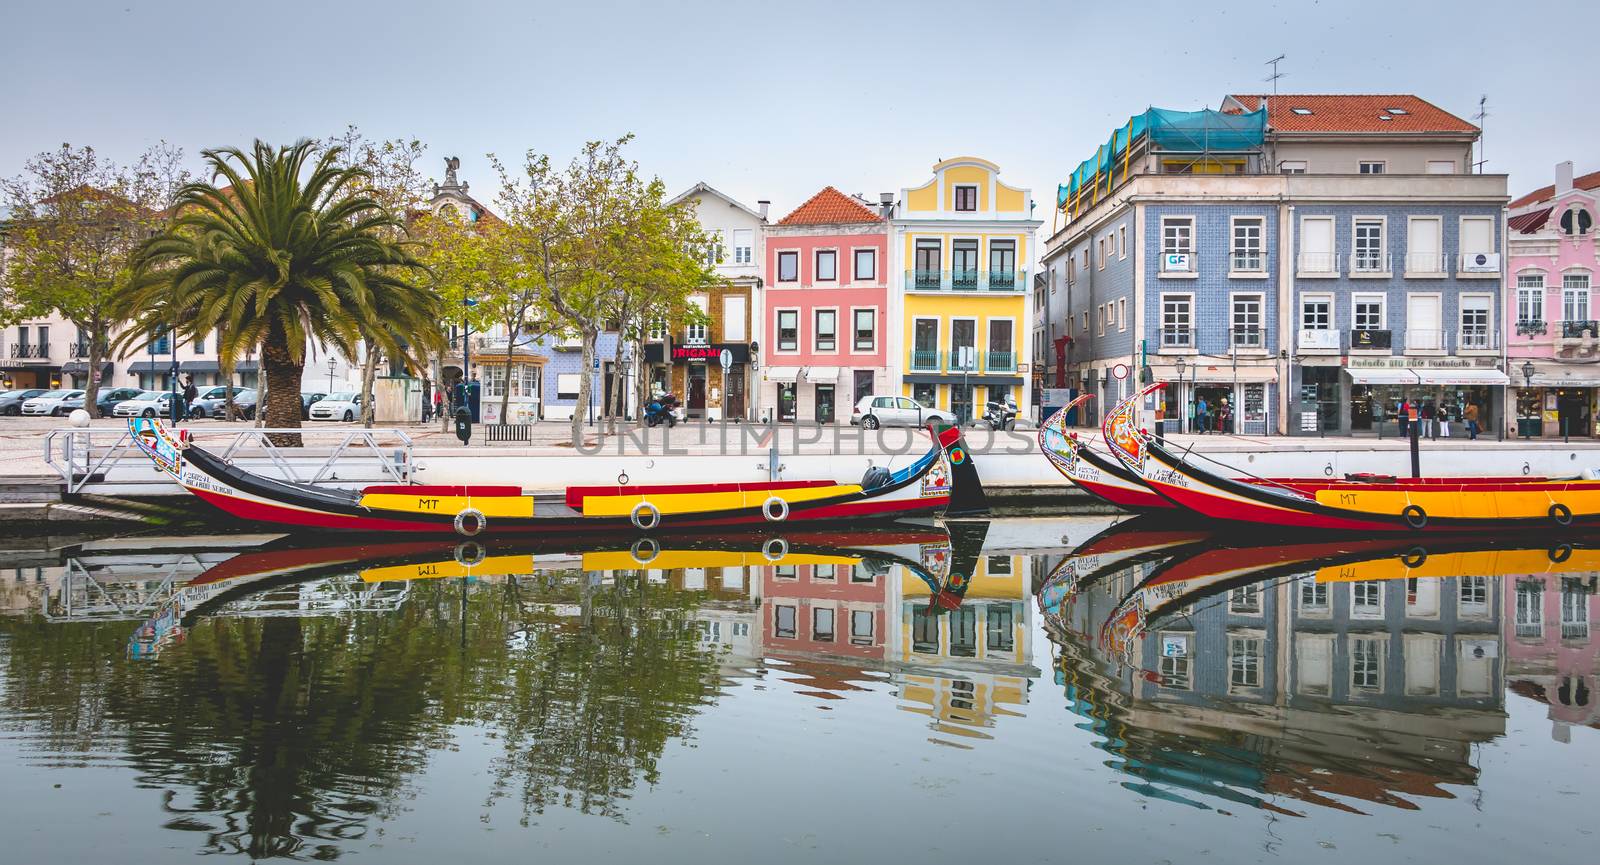 Aveiro, Portugal - May 7, 2018: Tourists walk on famous Moliceiros on a spring evening, traditional boats used to harvest seaweeds in the past